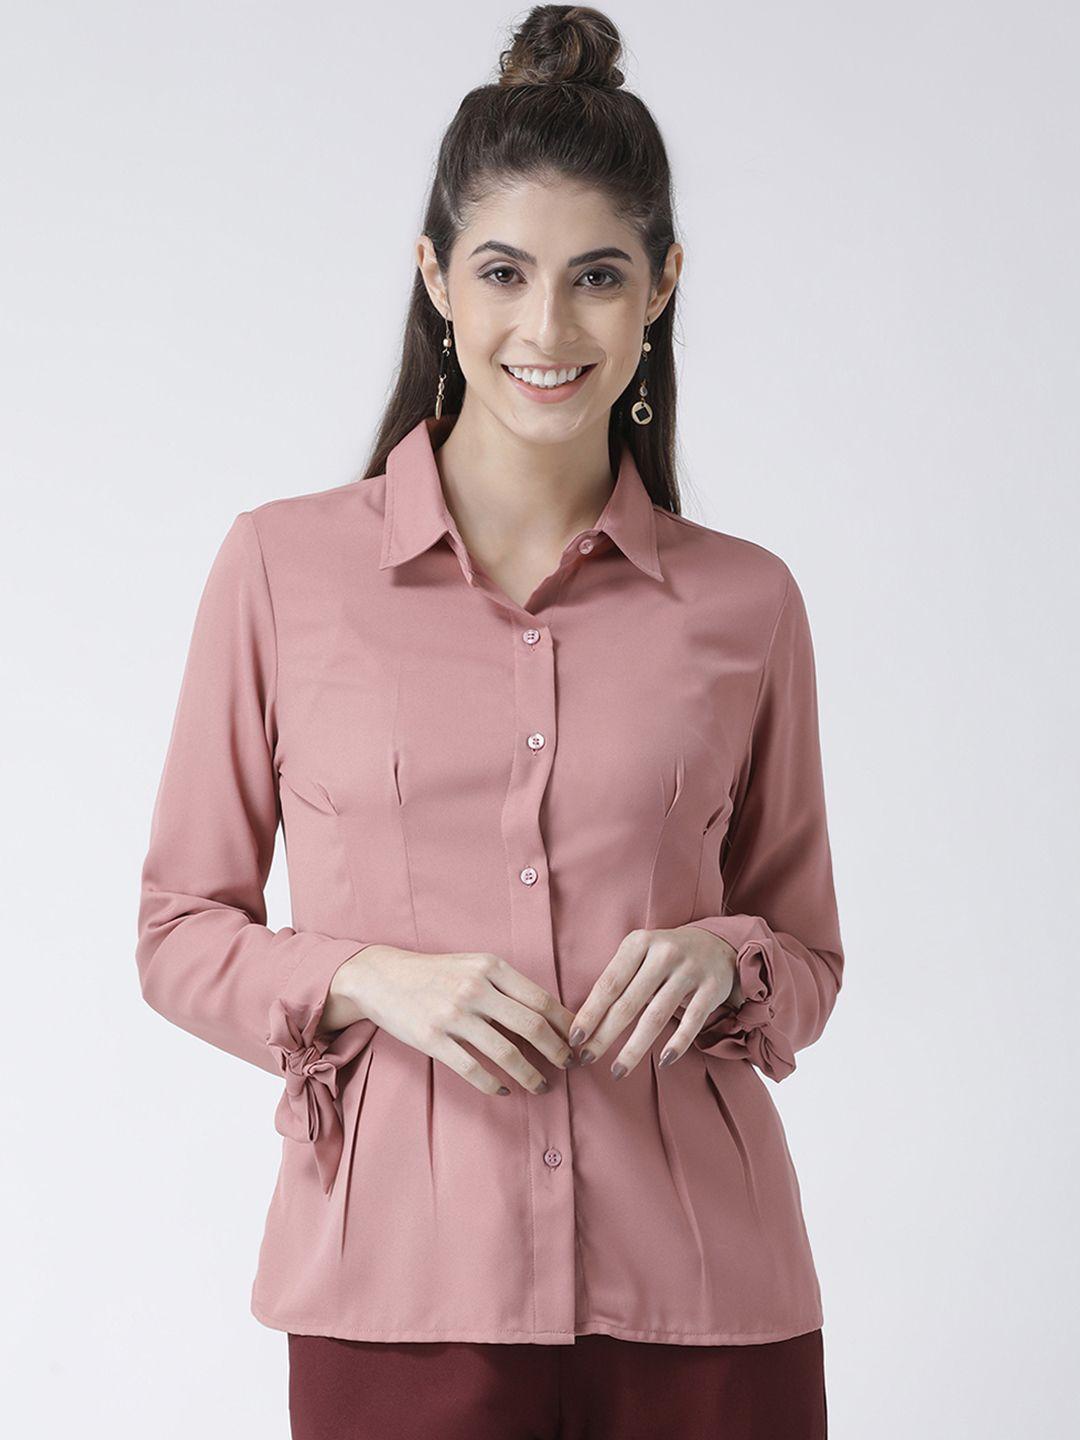 kassually women pink regular fit solid casual shirt